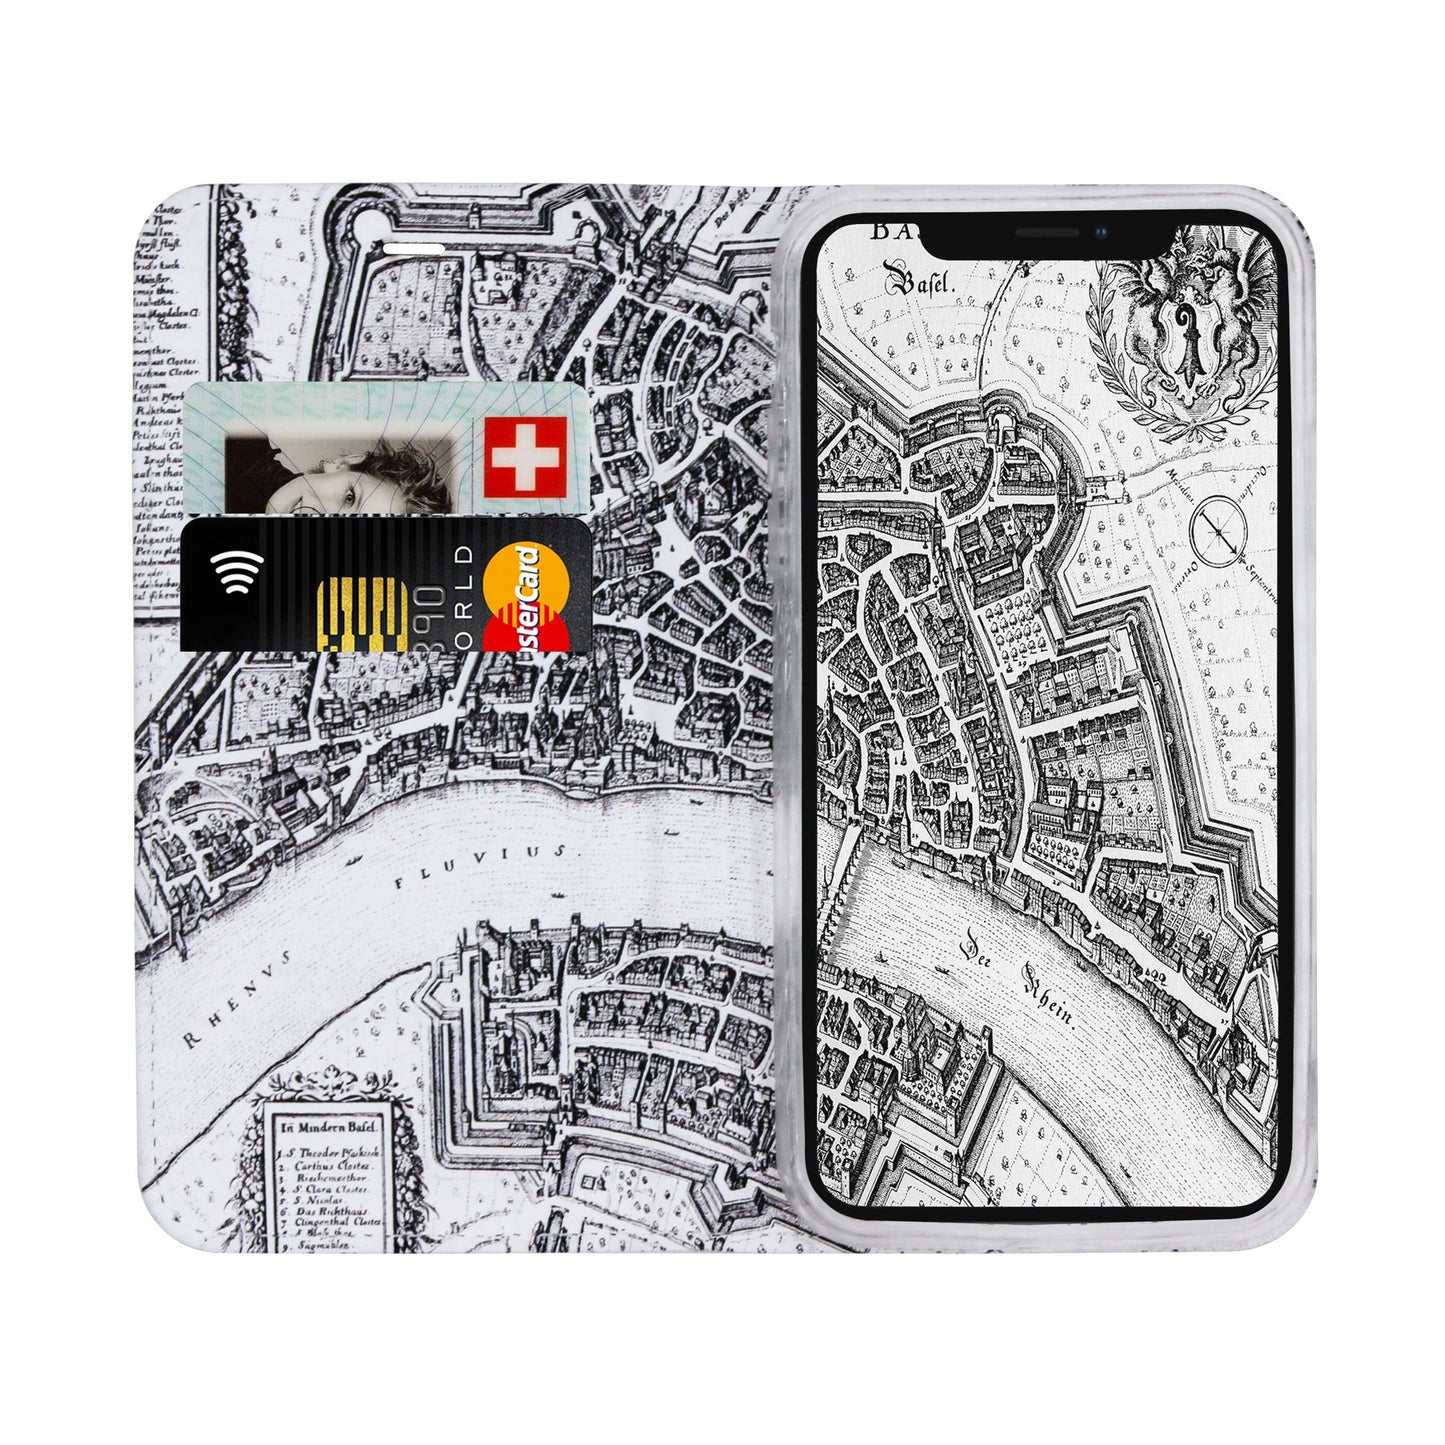 Basel Merian Panorama Case for iPhone X/XS